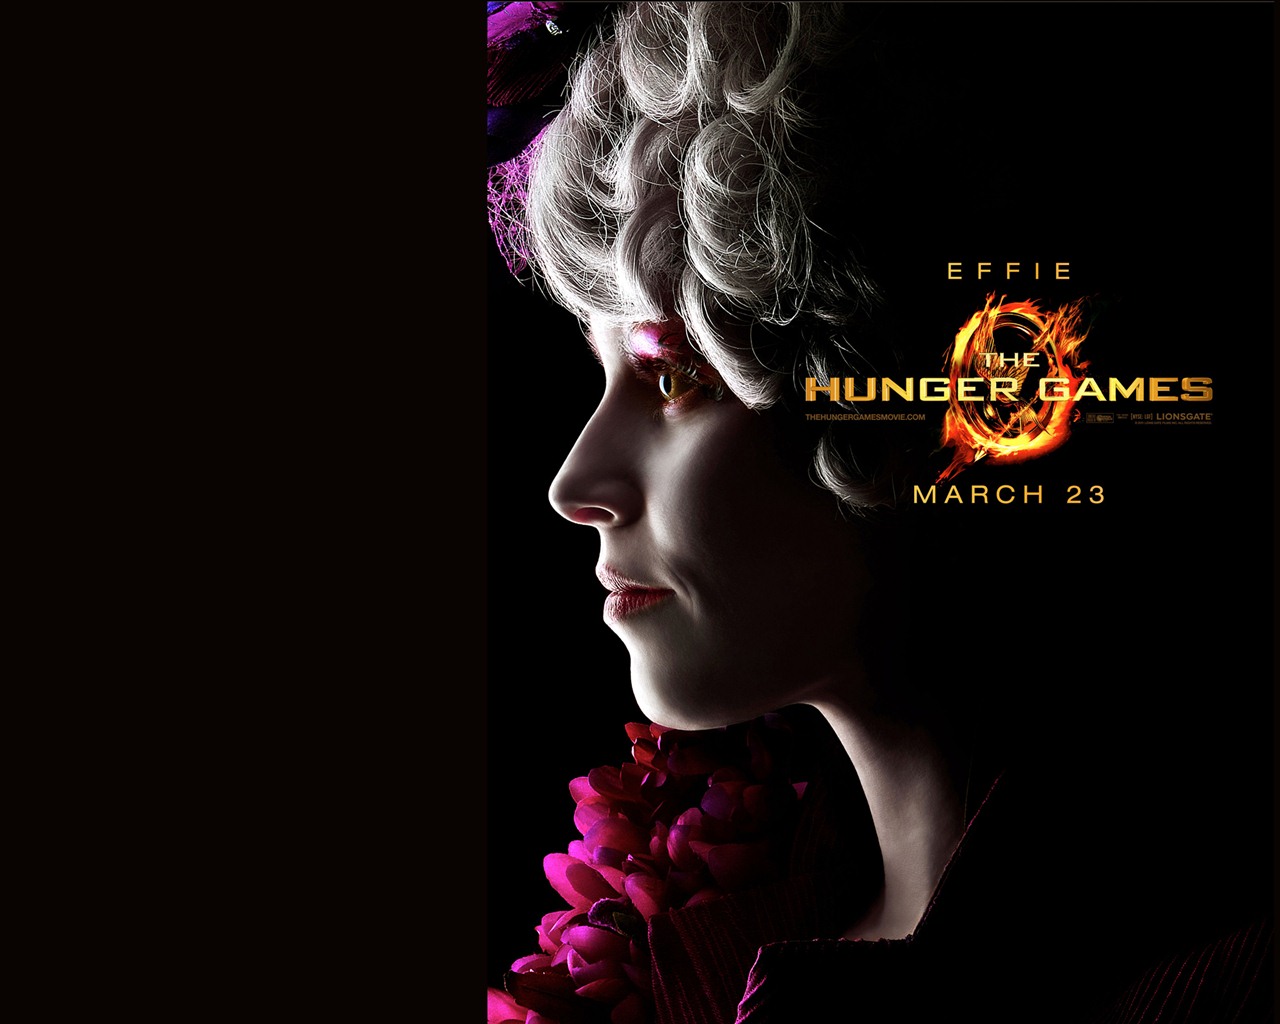 The Hunger Games HD wallpapers #10 - 1280x1024